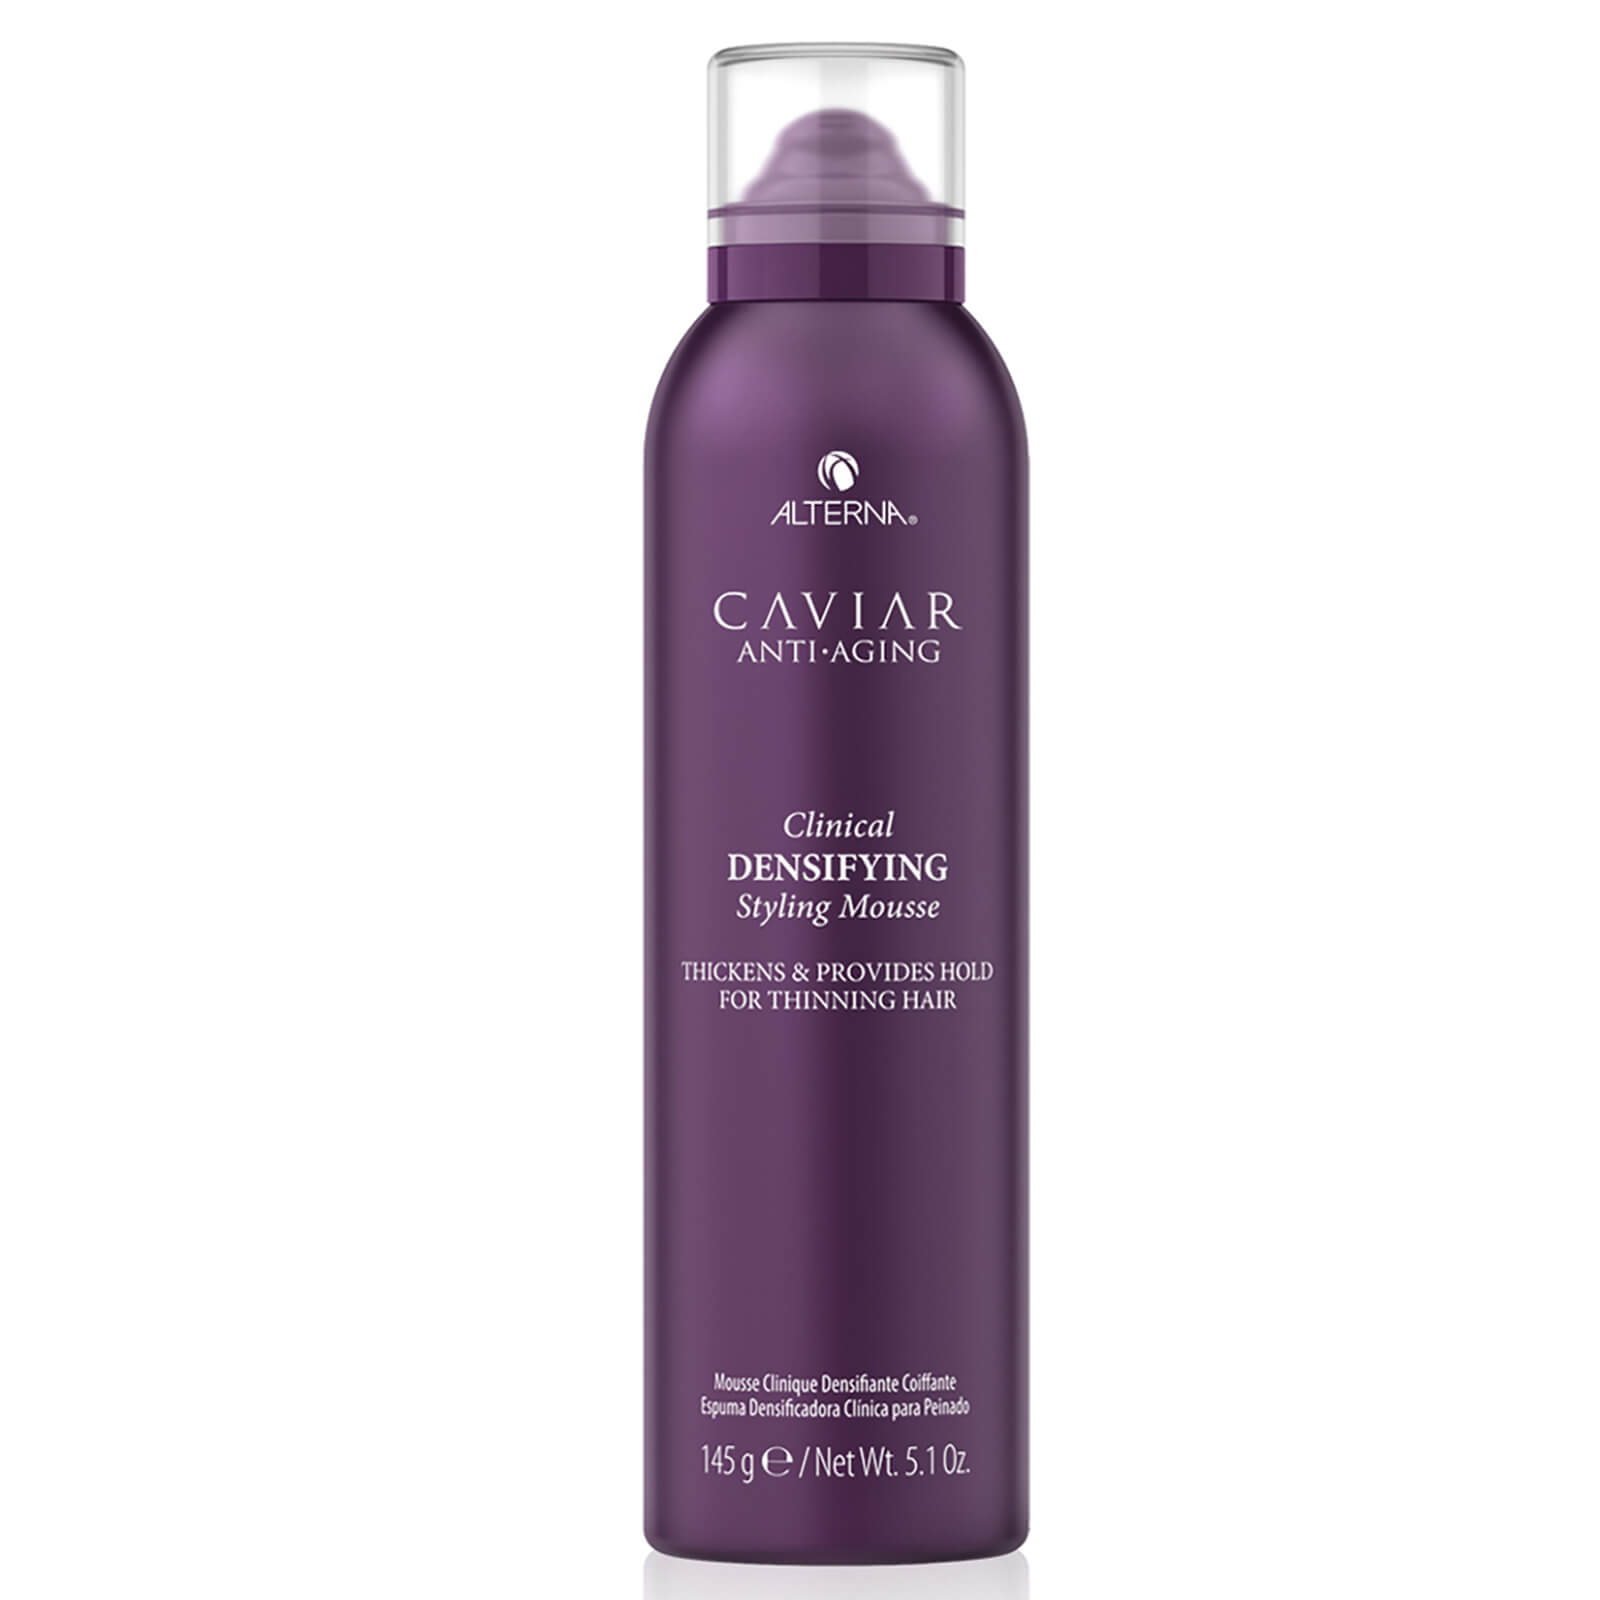 Shop Alterna Caviar Anti-aging Clinical Densifying Styling Mousse 5.1 oz